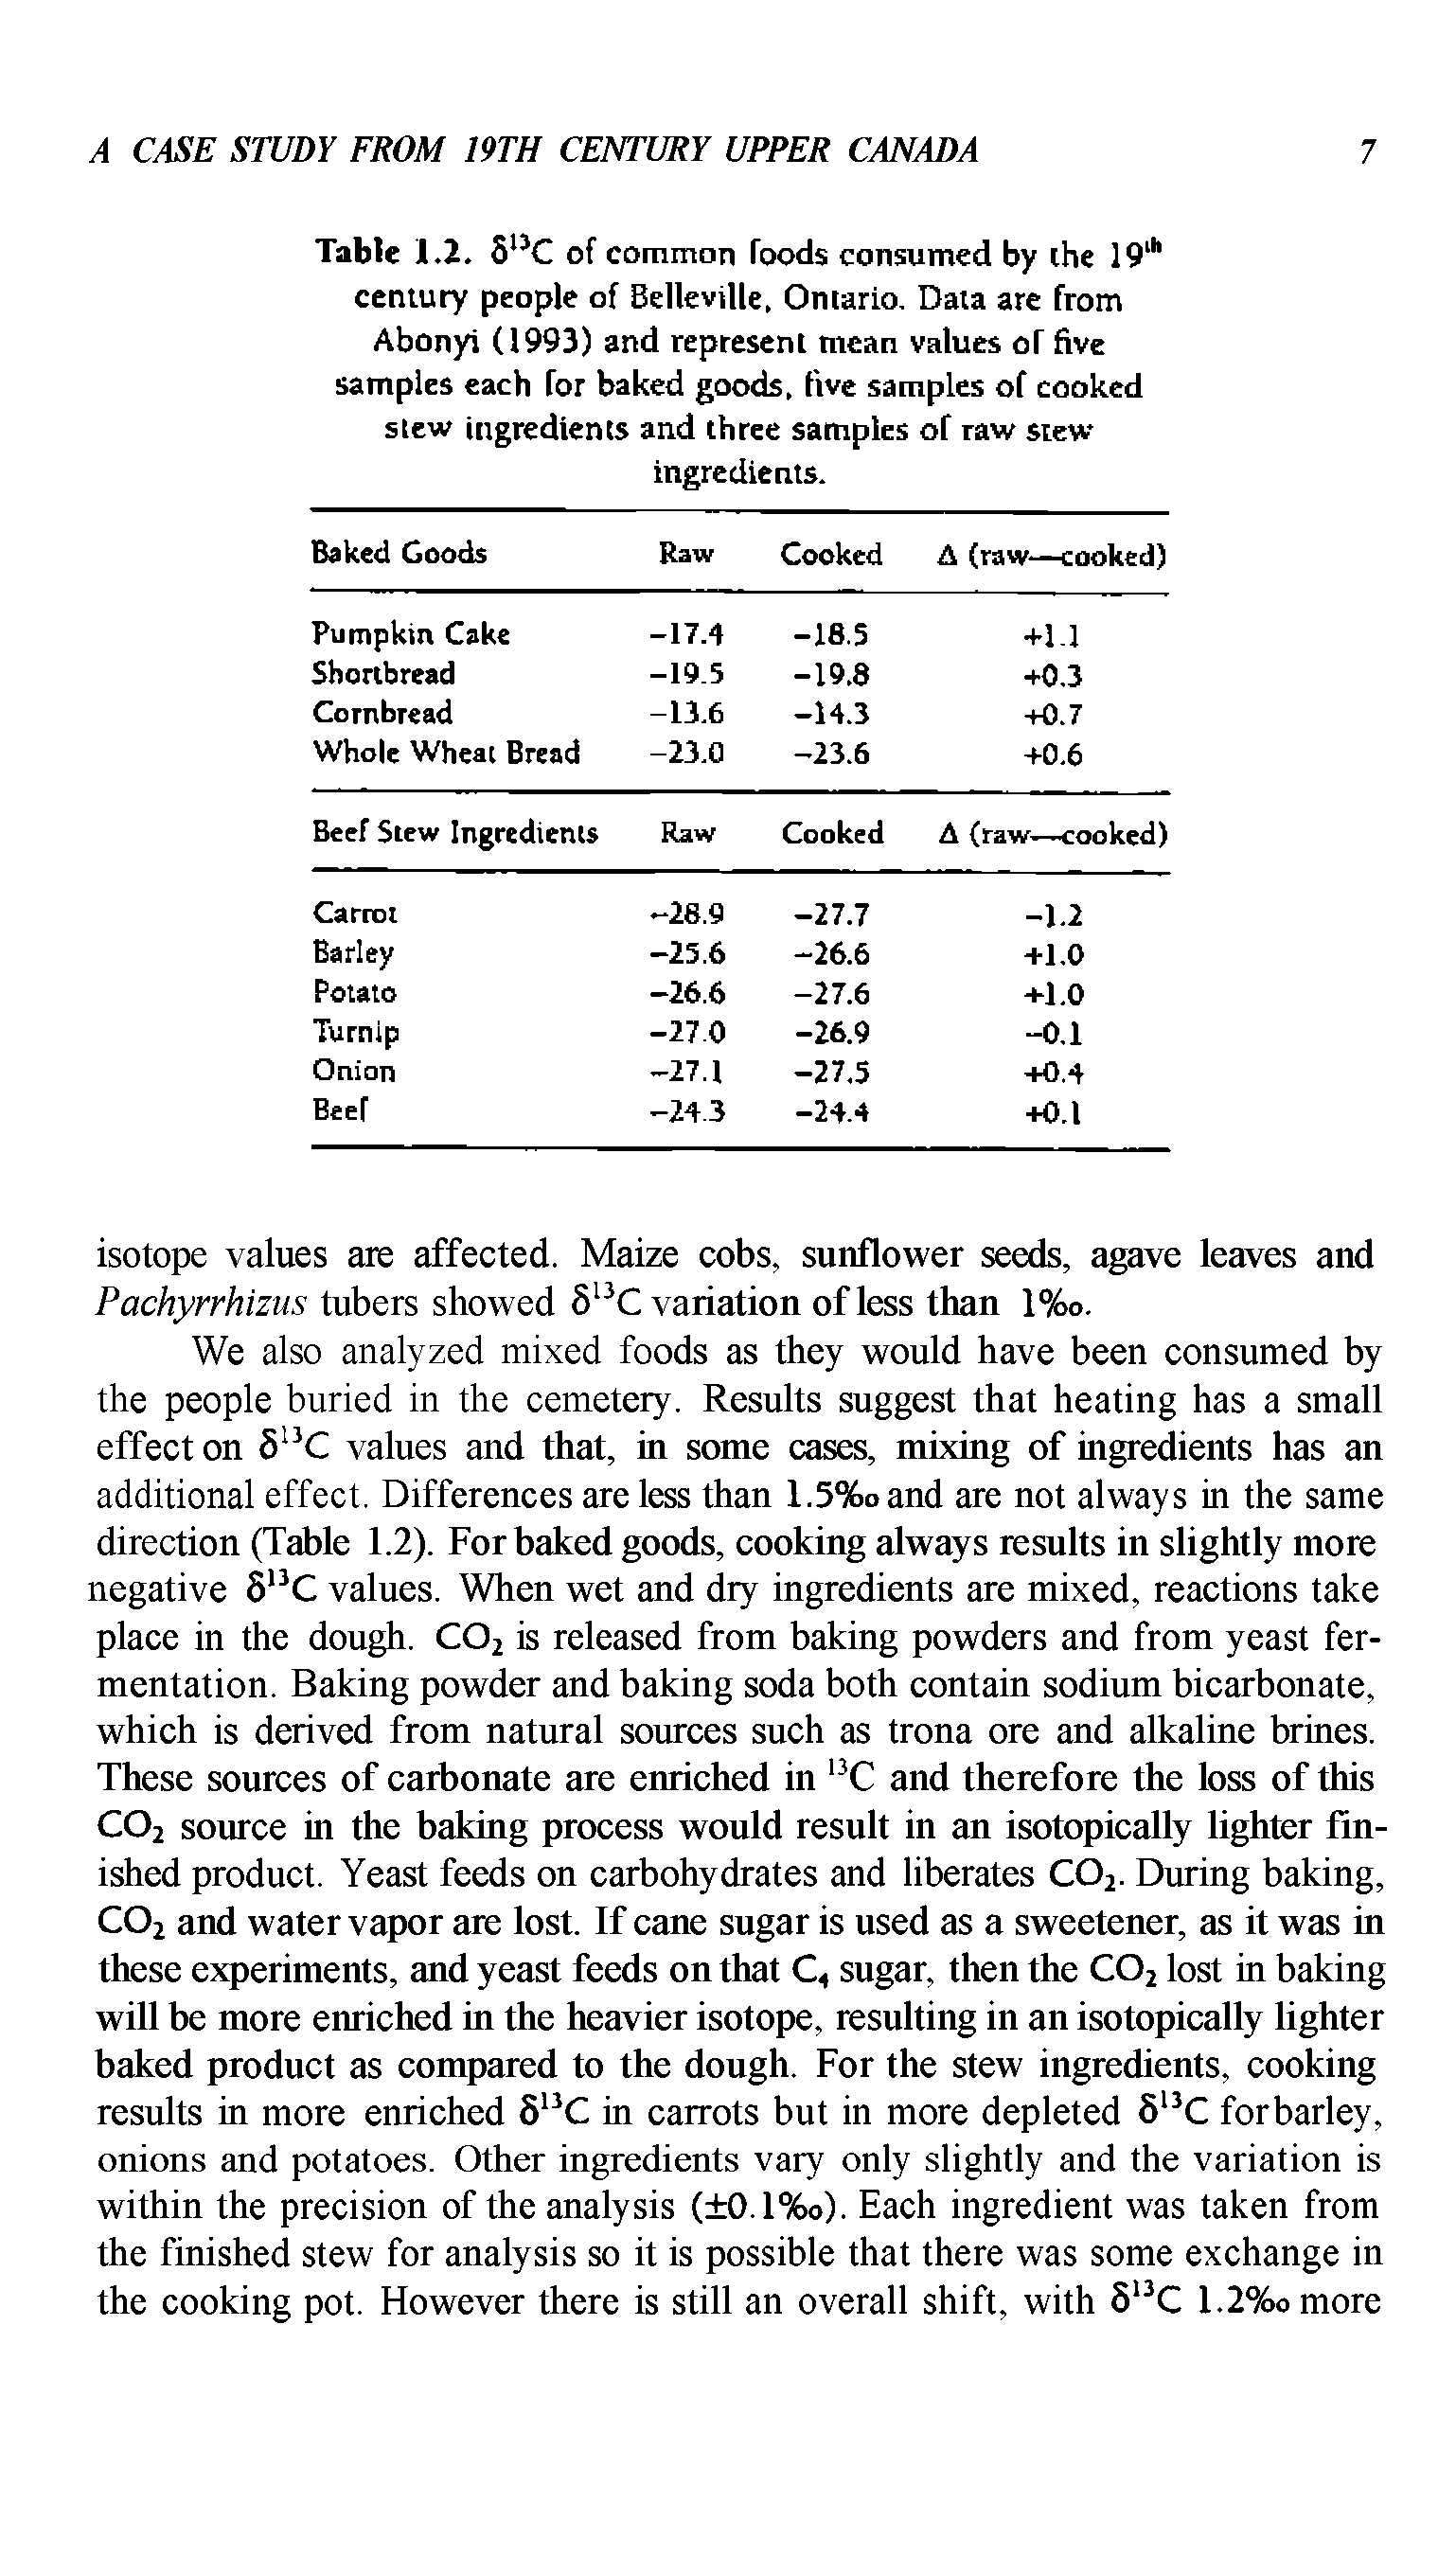 Table 1.2. 5 C of common foods consumed by ihe 19 century people of Belleville. Ontario, Data are from Abonyi (1993) and represent mean values of five samples each for baked goods, five samples of cooked stew ingredients and three samples of raw stew ingredients.